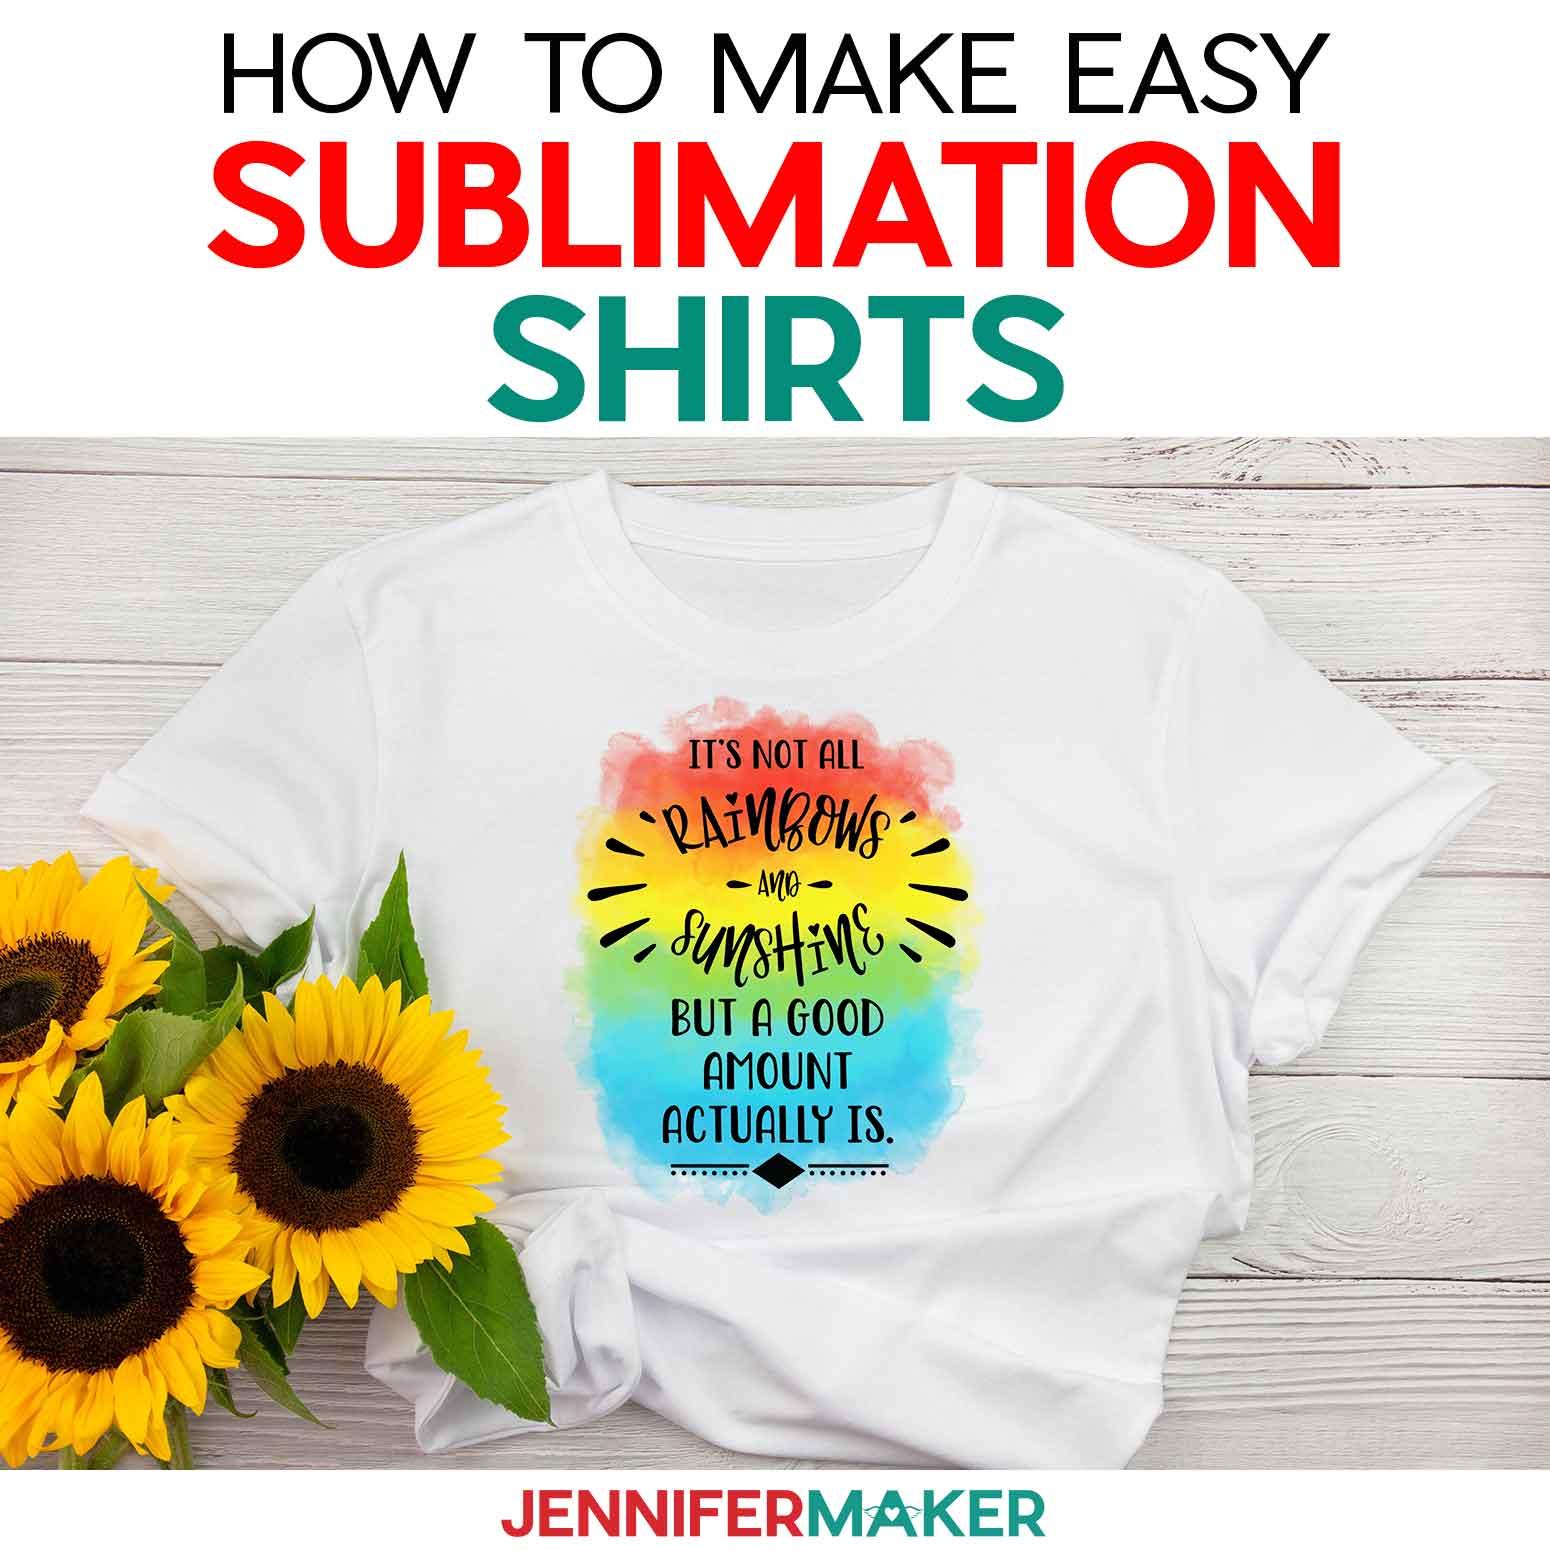 Sublimation Color Problems and how to fix them with troubleshooting steps